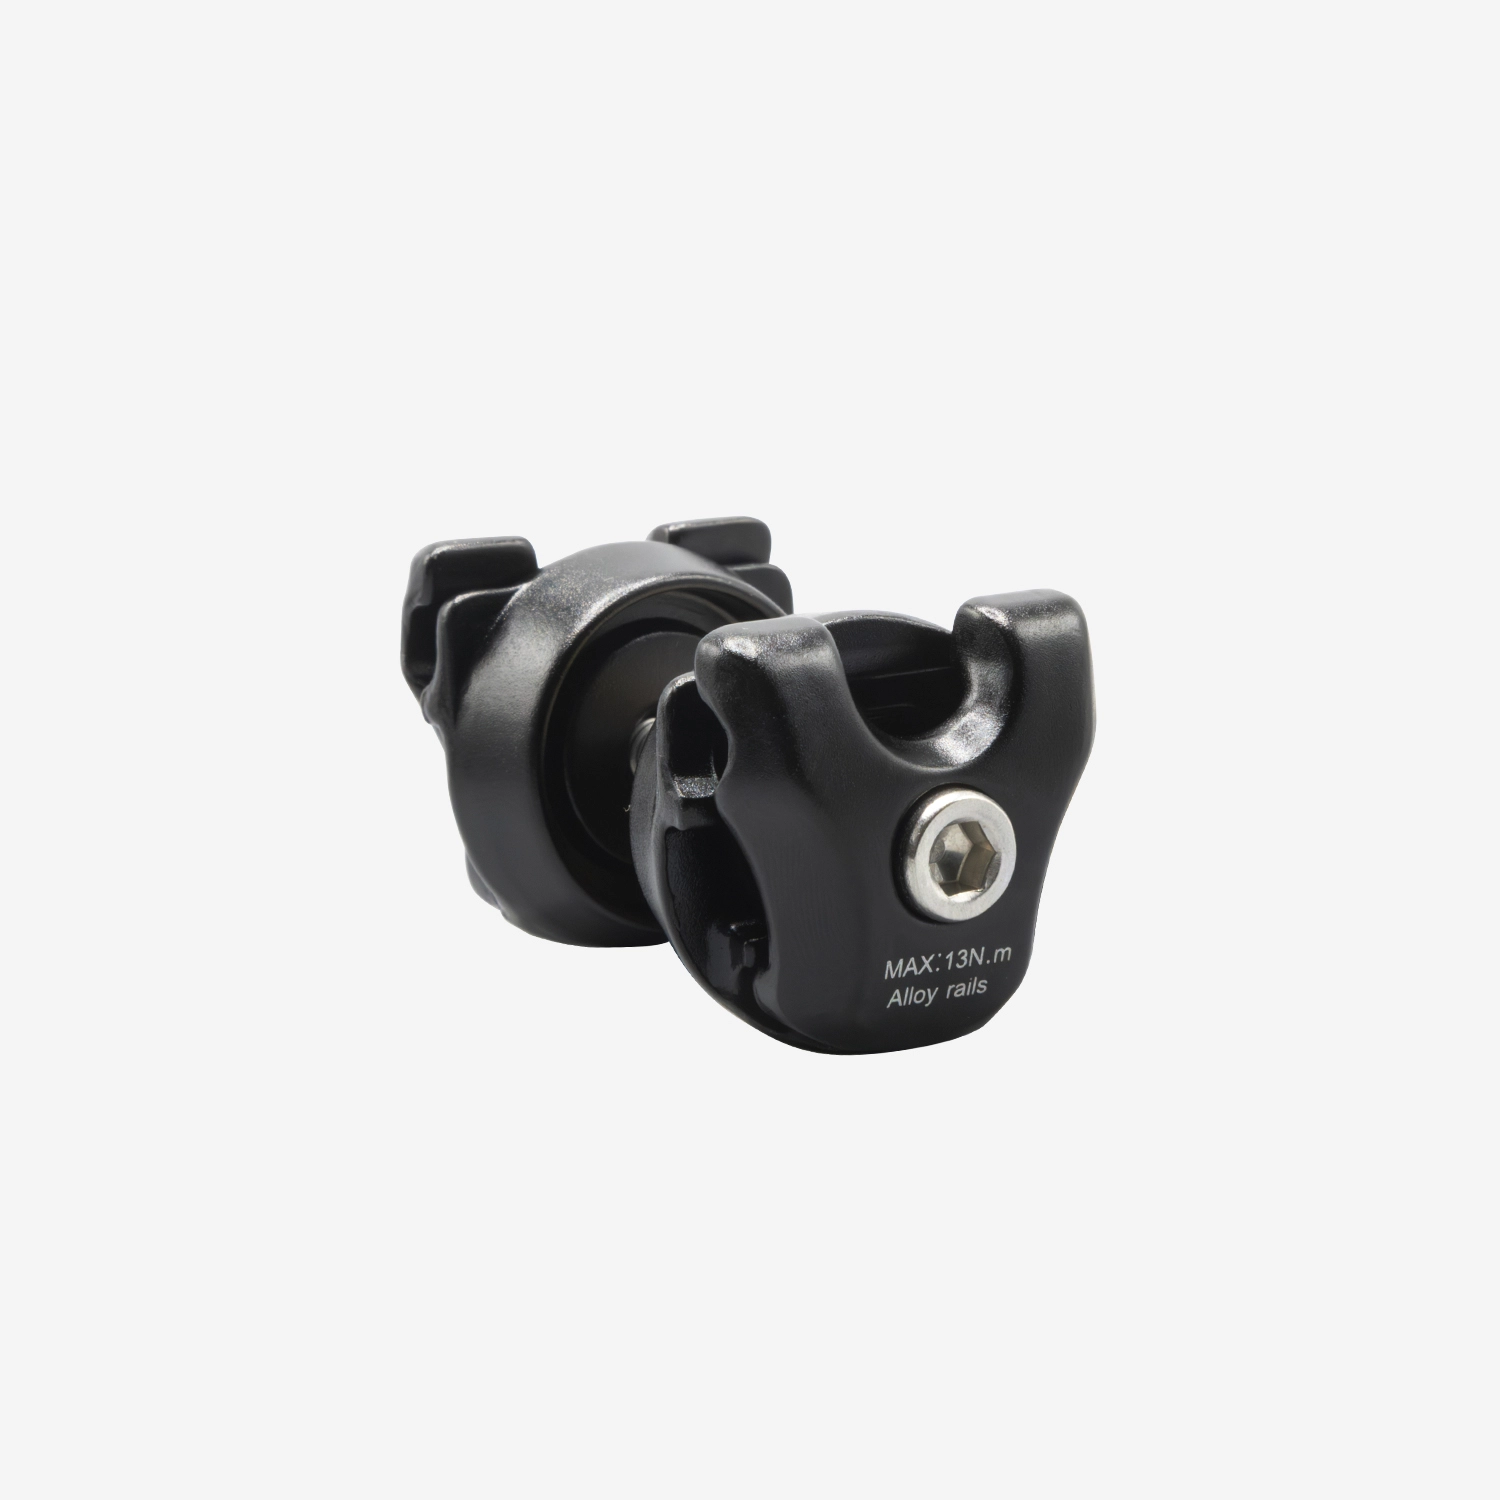 Basso Saddle Clamp for Alloy rails